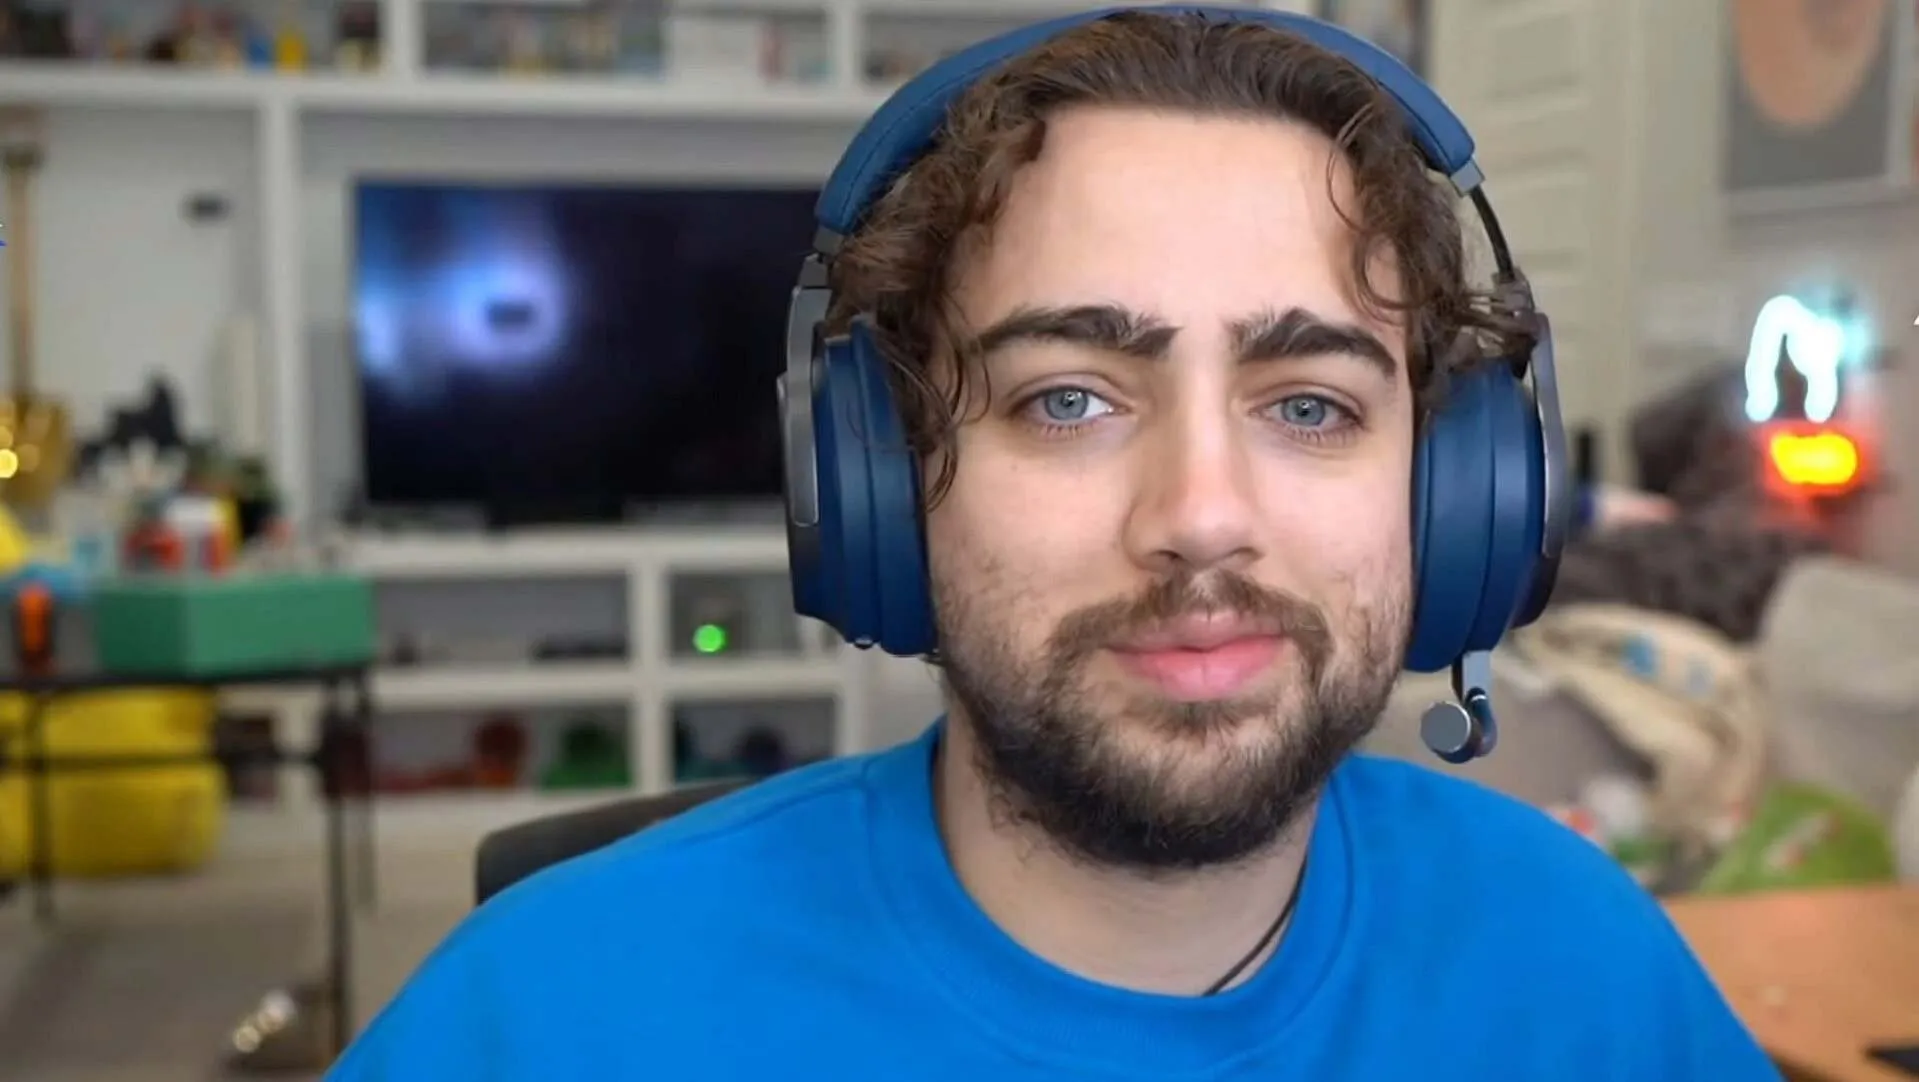 Mizkif considered quitting Twitch due to mental health concerns